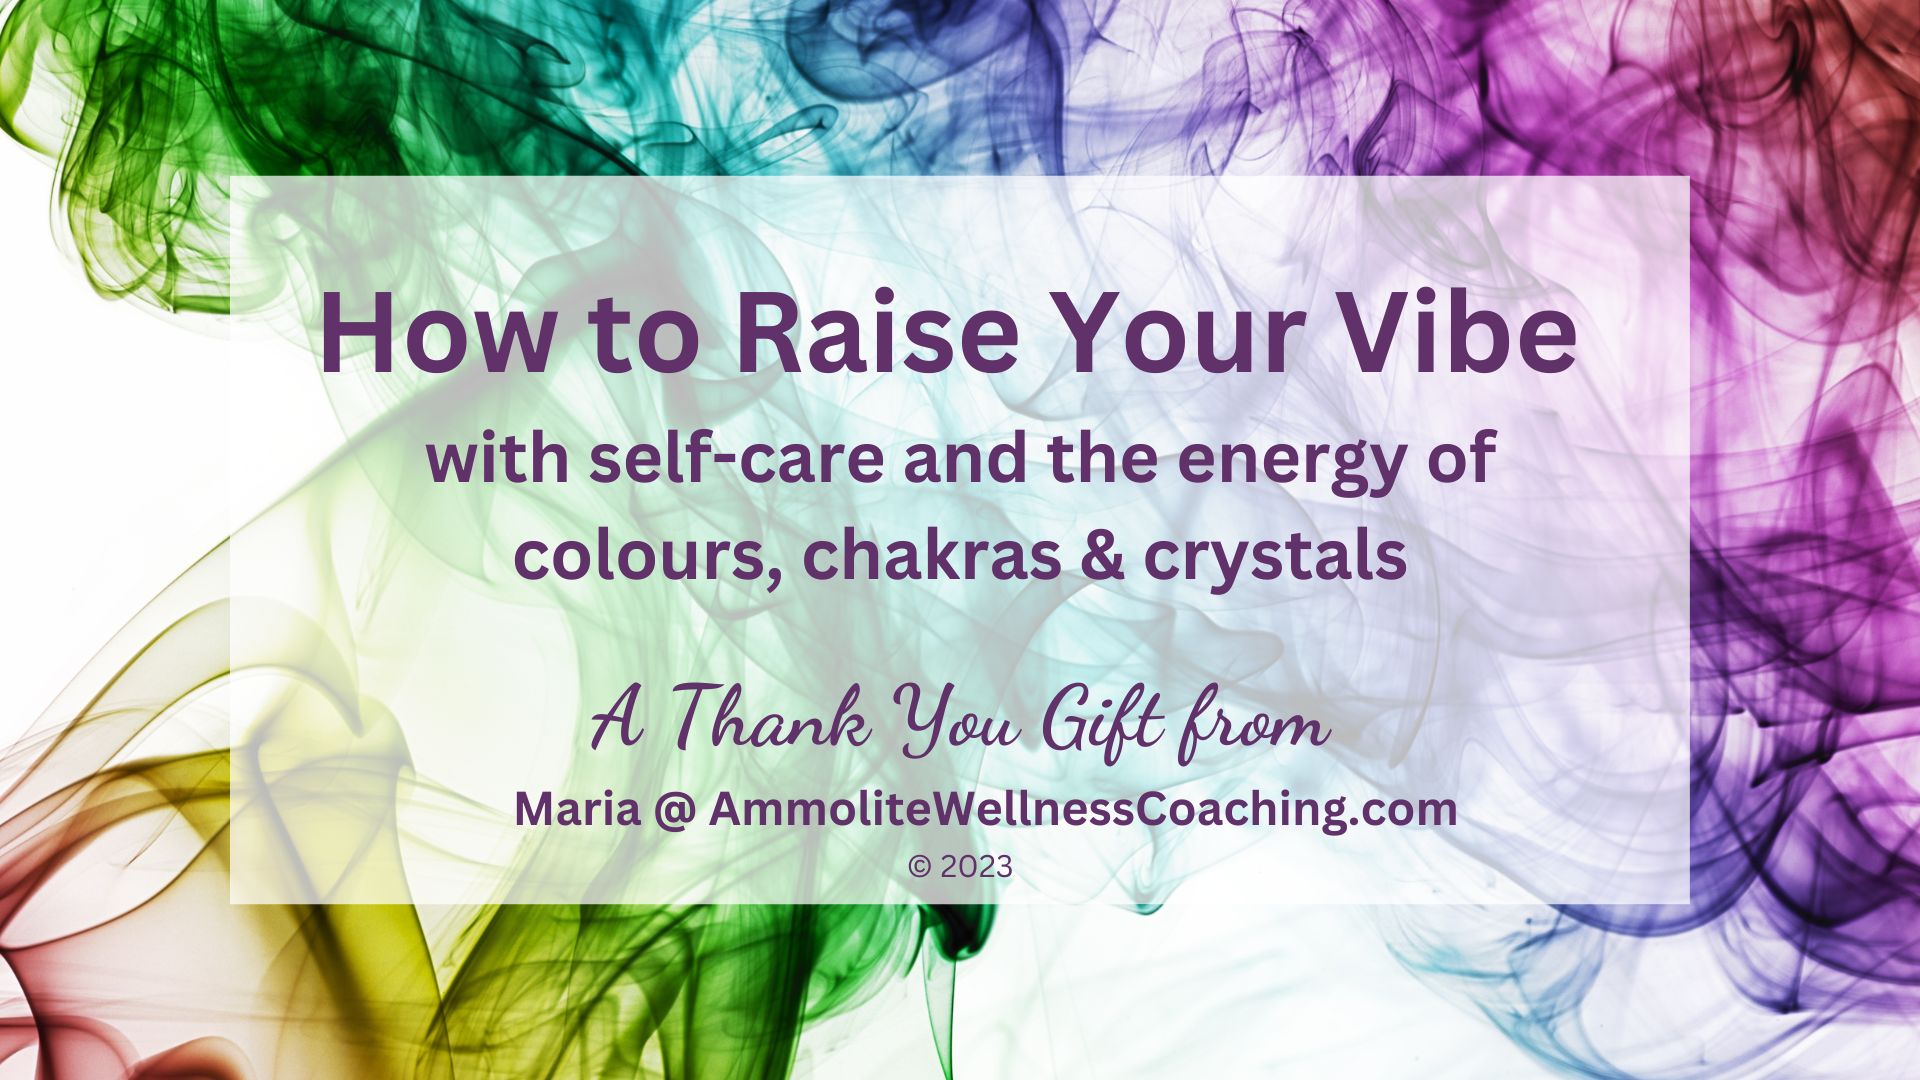 Free Gift: How to Raise Your Vibe.